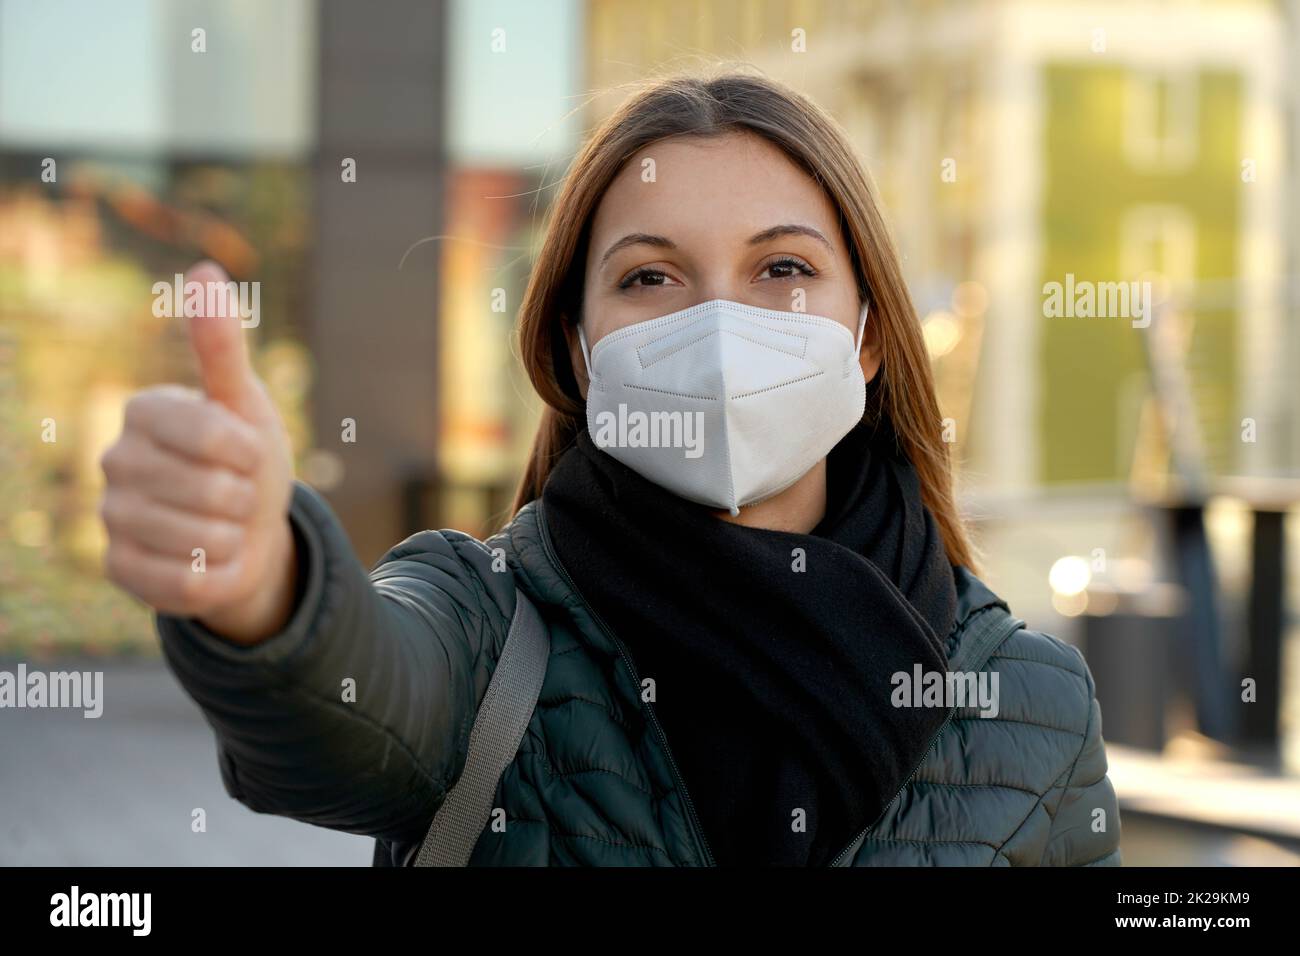 Happy young woman wearing medical face mask showing thumbs up in the evening outside. Looking camera. Stock Photo